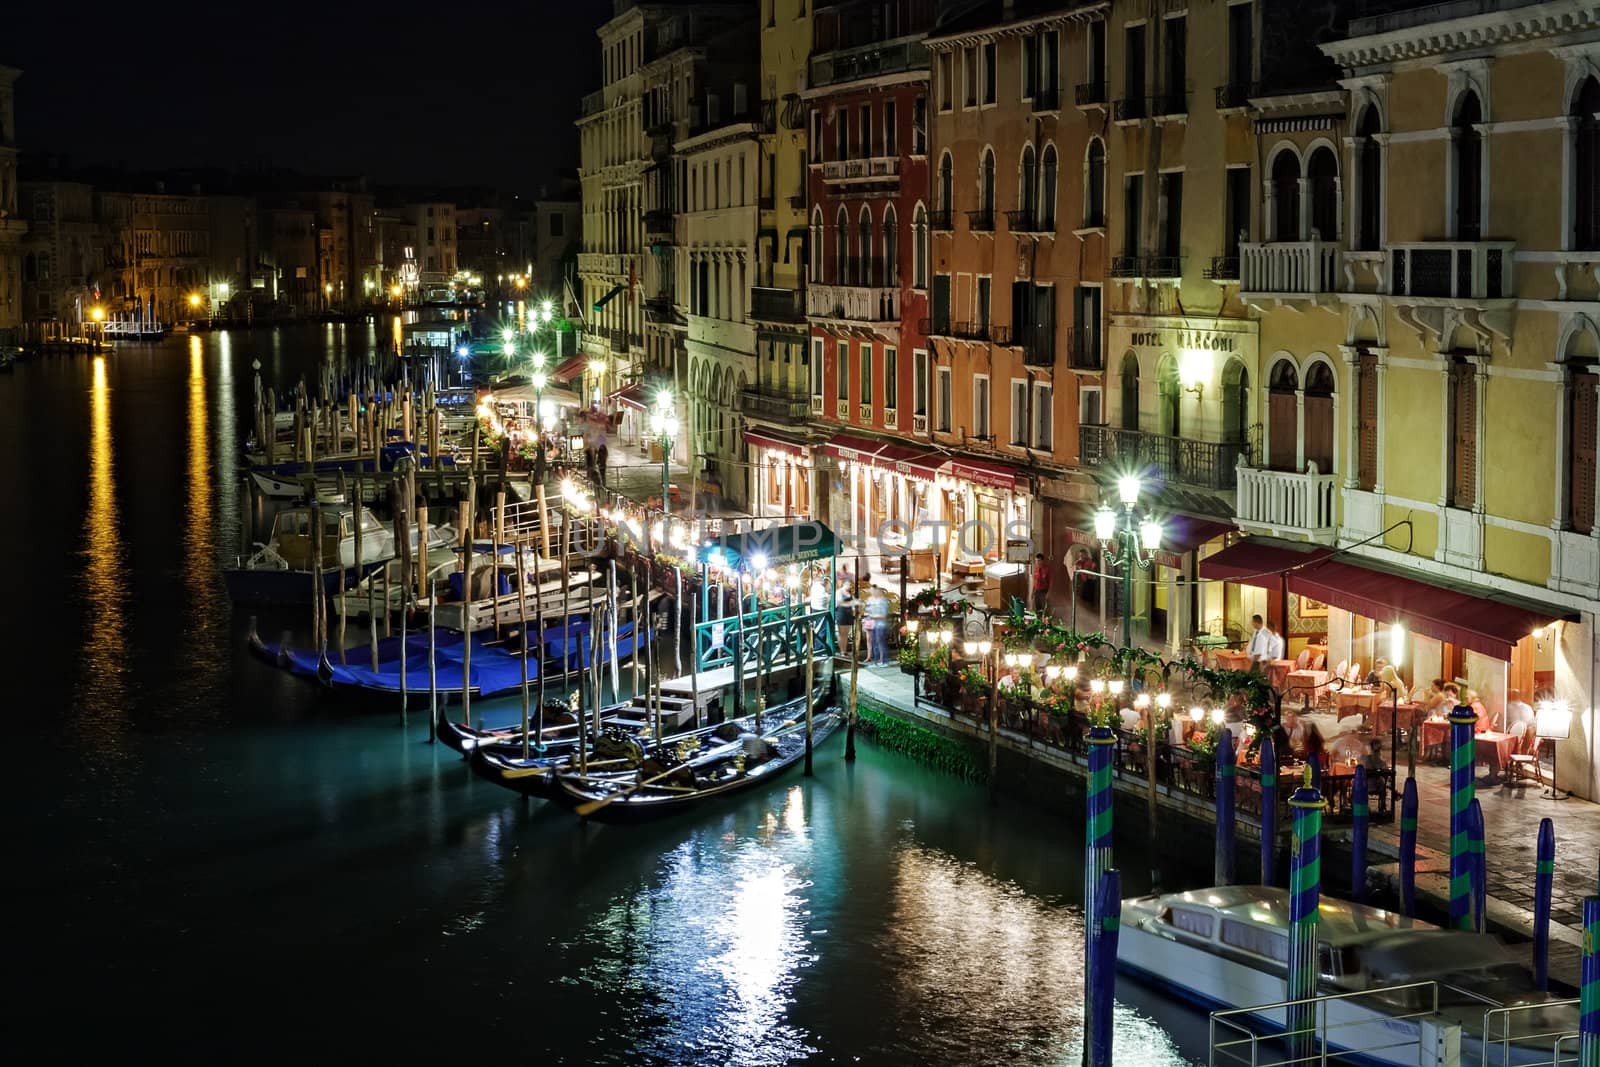 Grand Canal at night, Venice. Italy